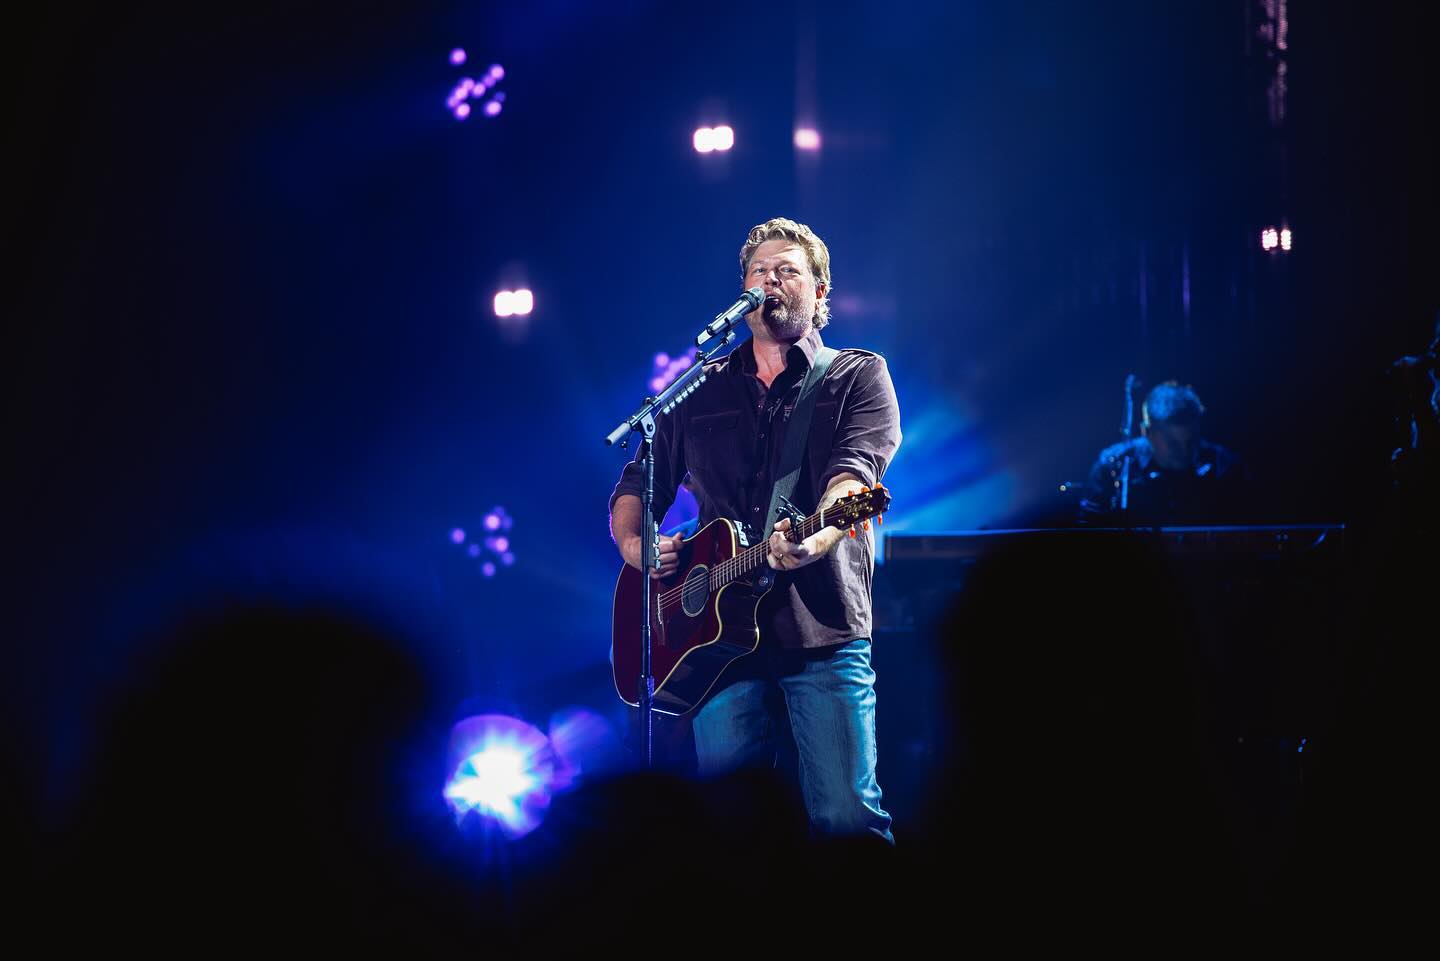 Blake posted a video montage that showed him performing during a recent concert